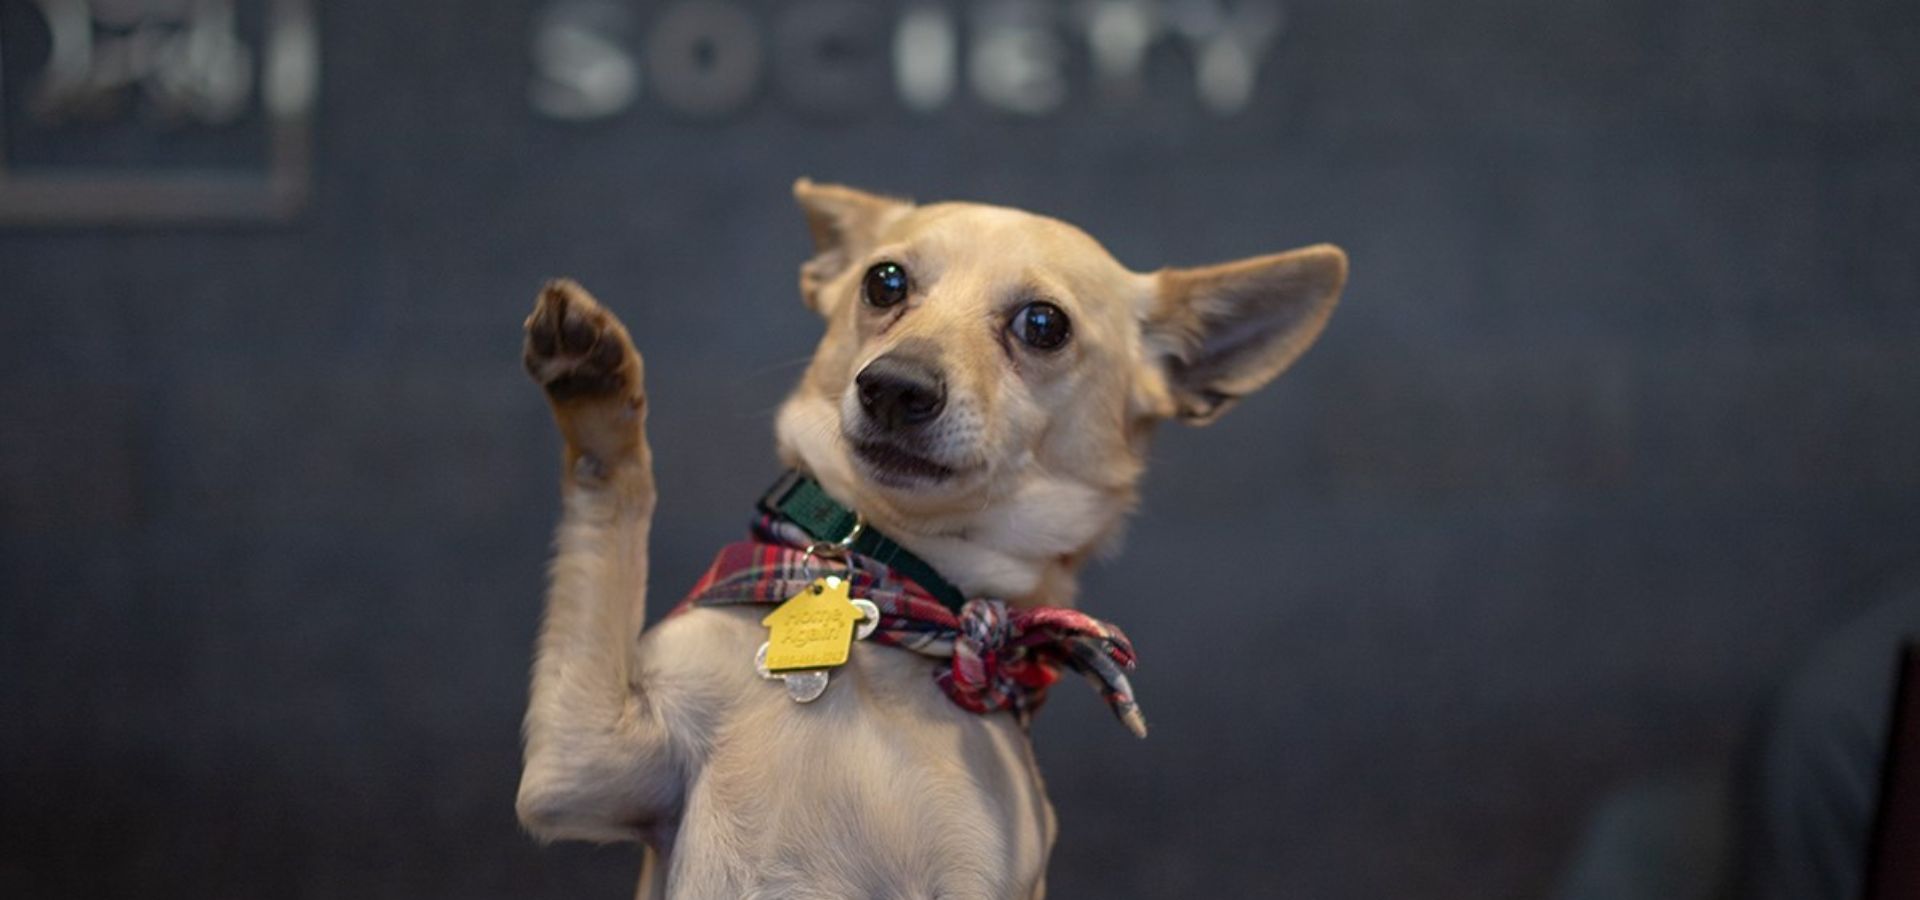 Dog at Oregon Humane Society posing for the camera and holding his paw up like he is waving